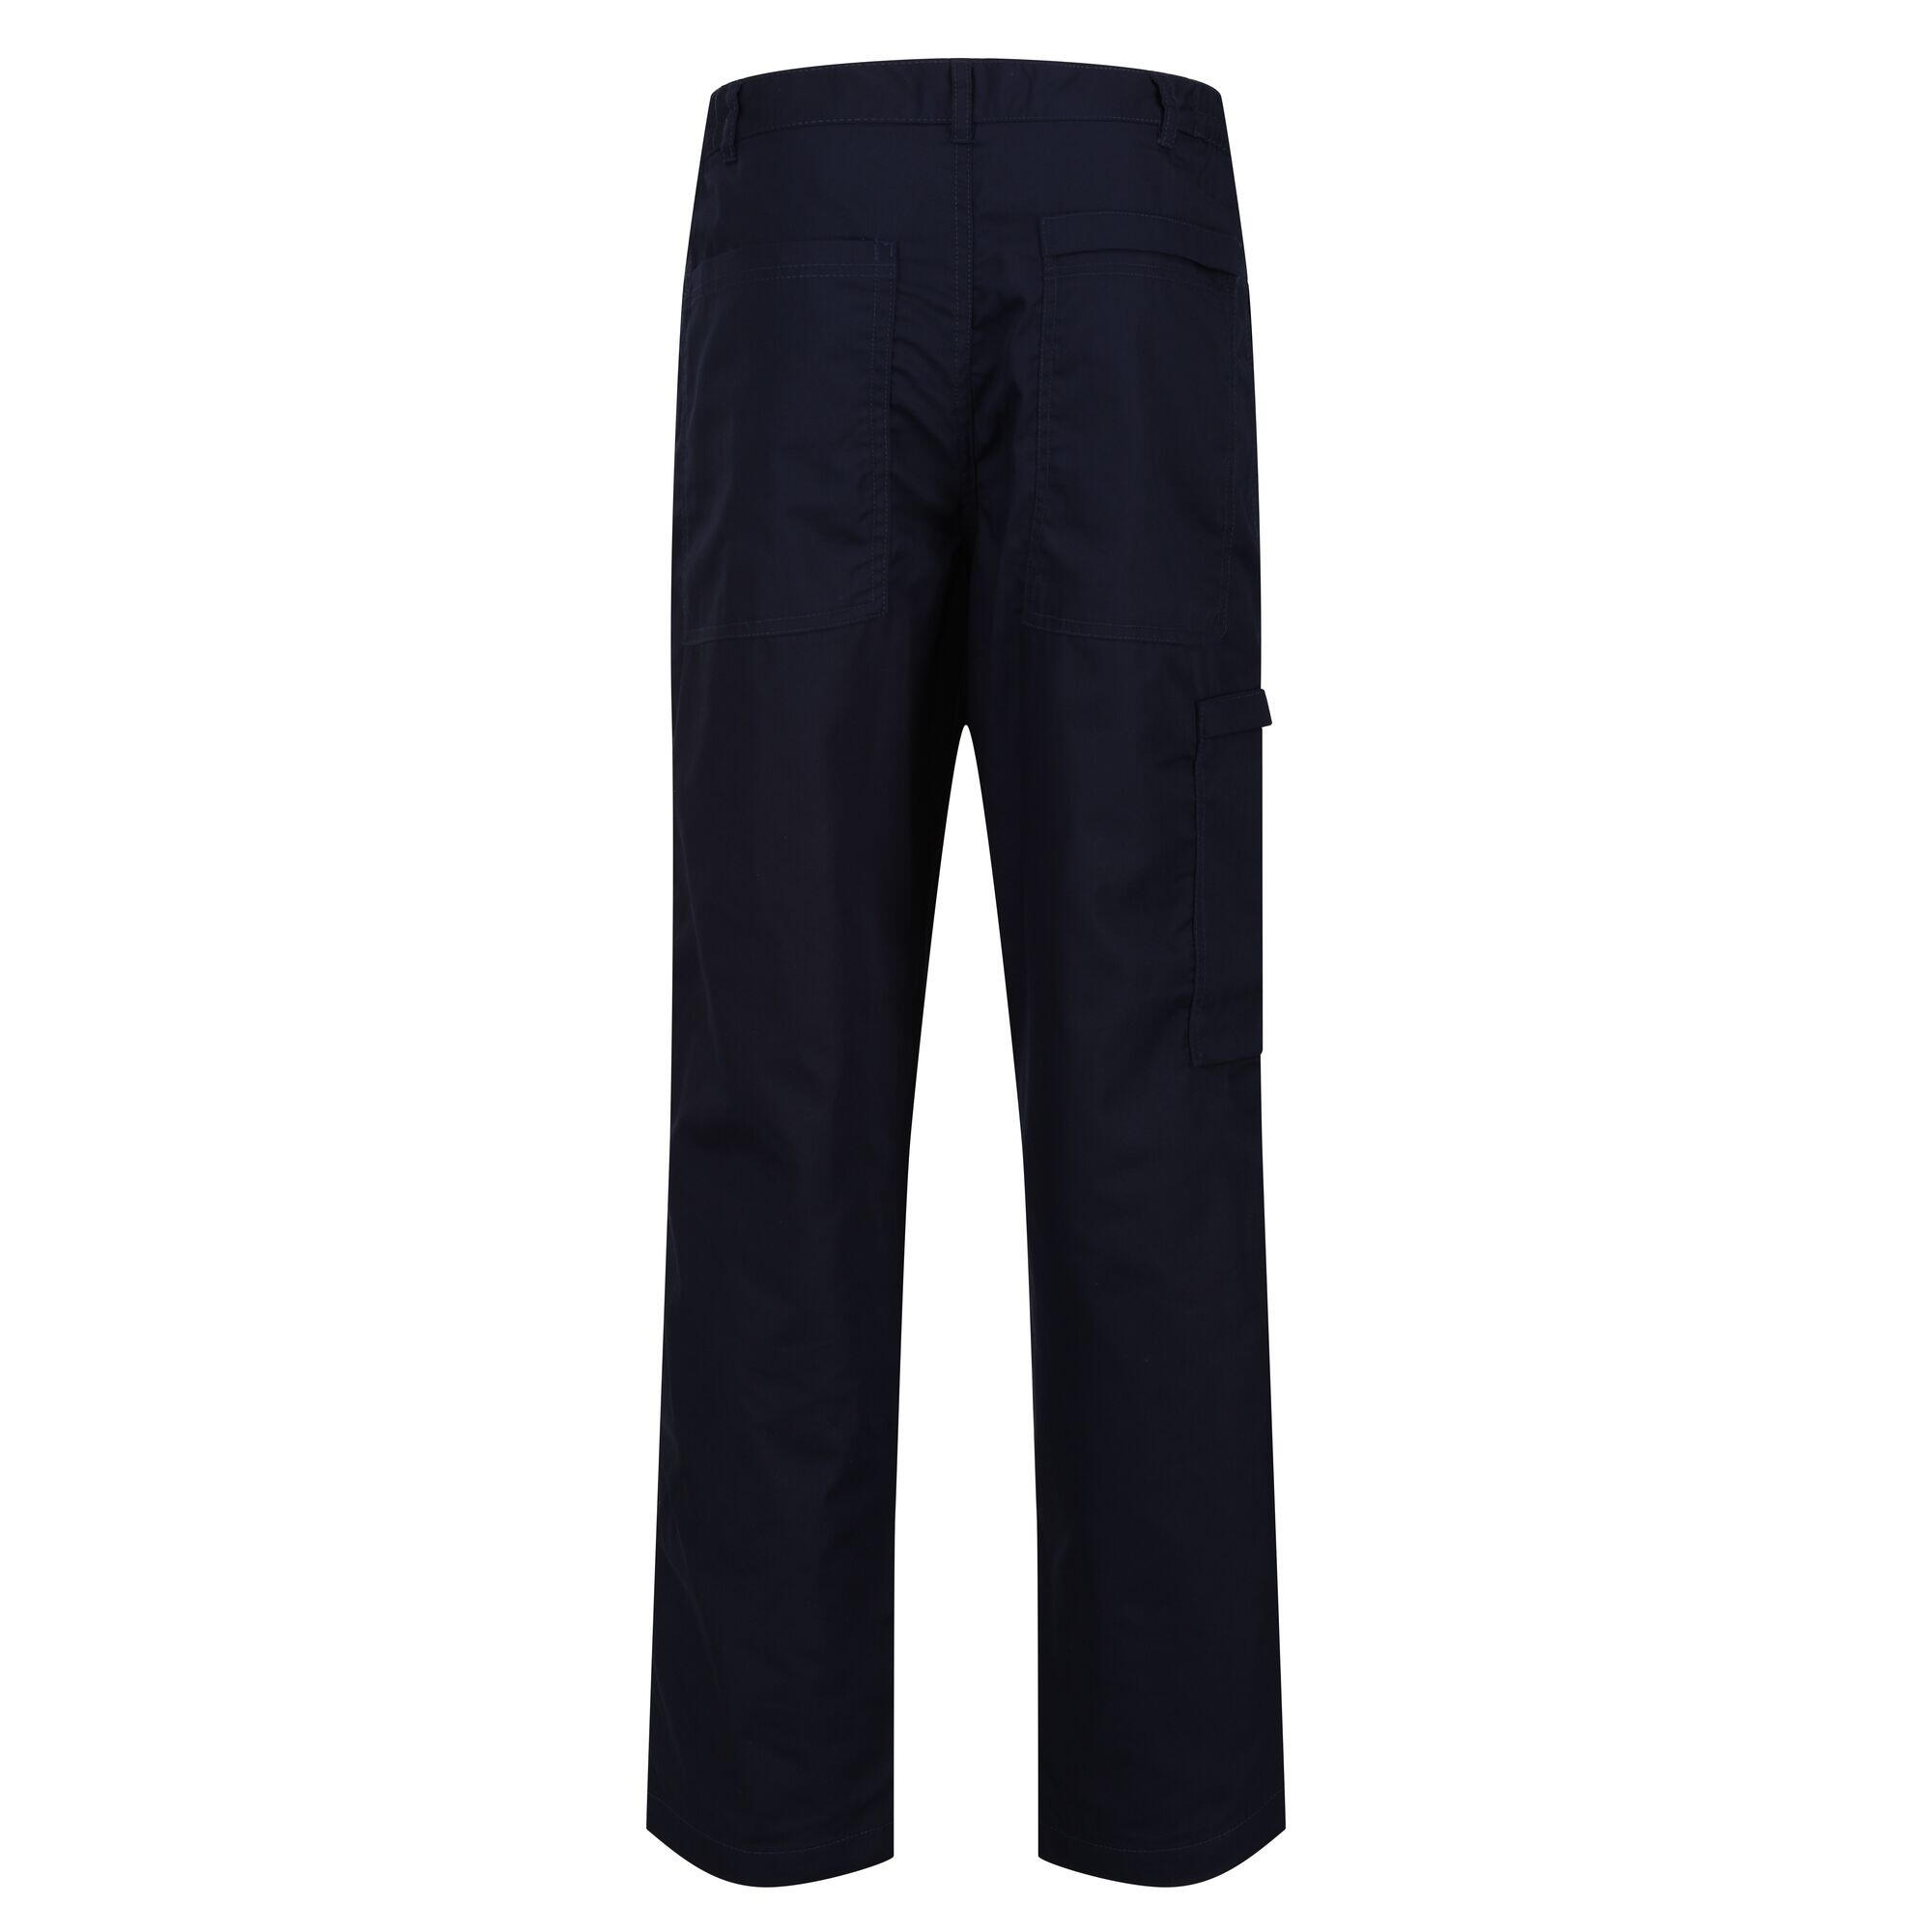 Mens Sports New Lined Action Trousers (Navy) 2/4